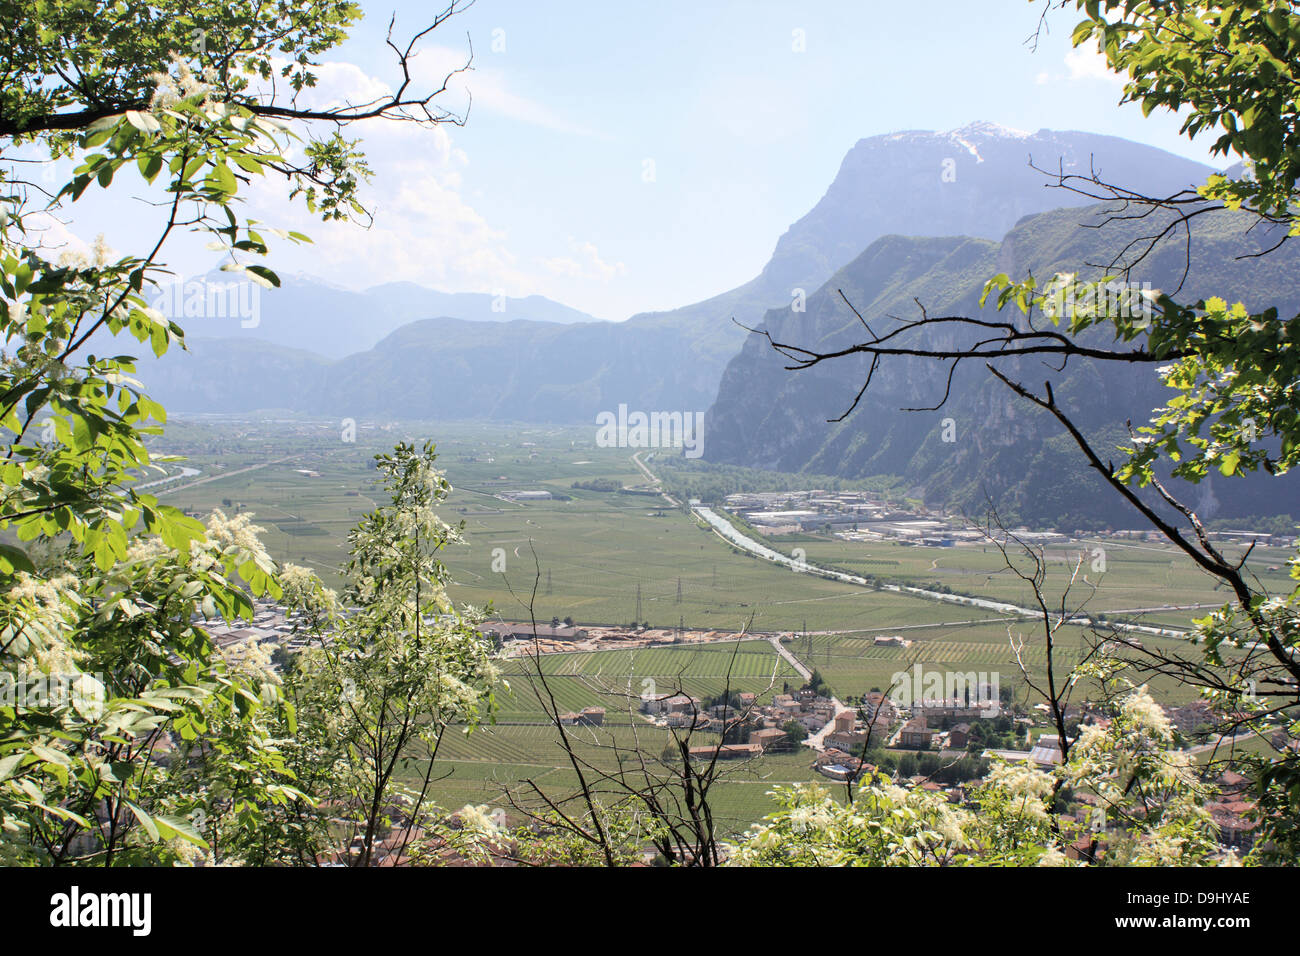 Mezzocorona, view to Paganella from the hiking path to Monte. Stock Photo